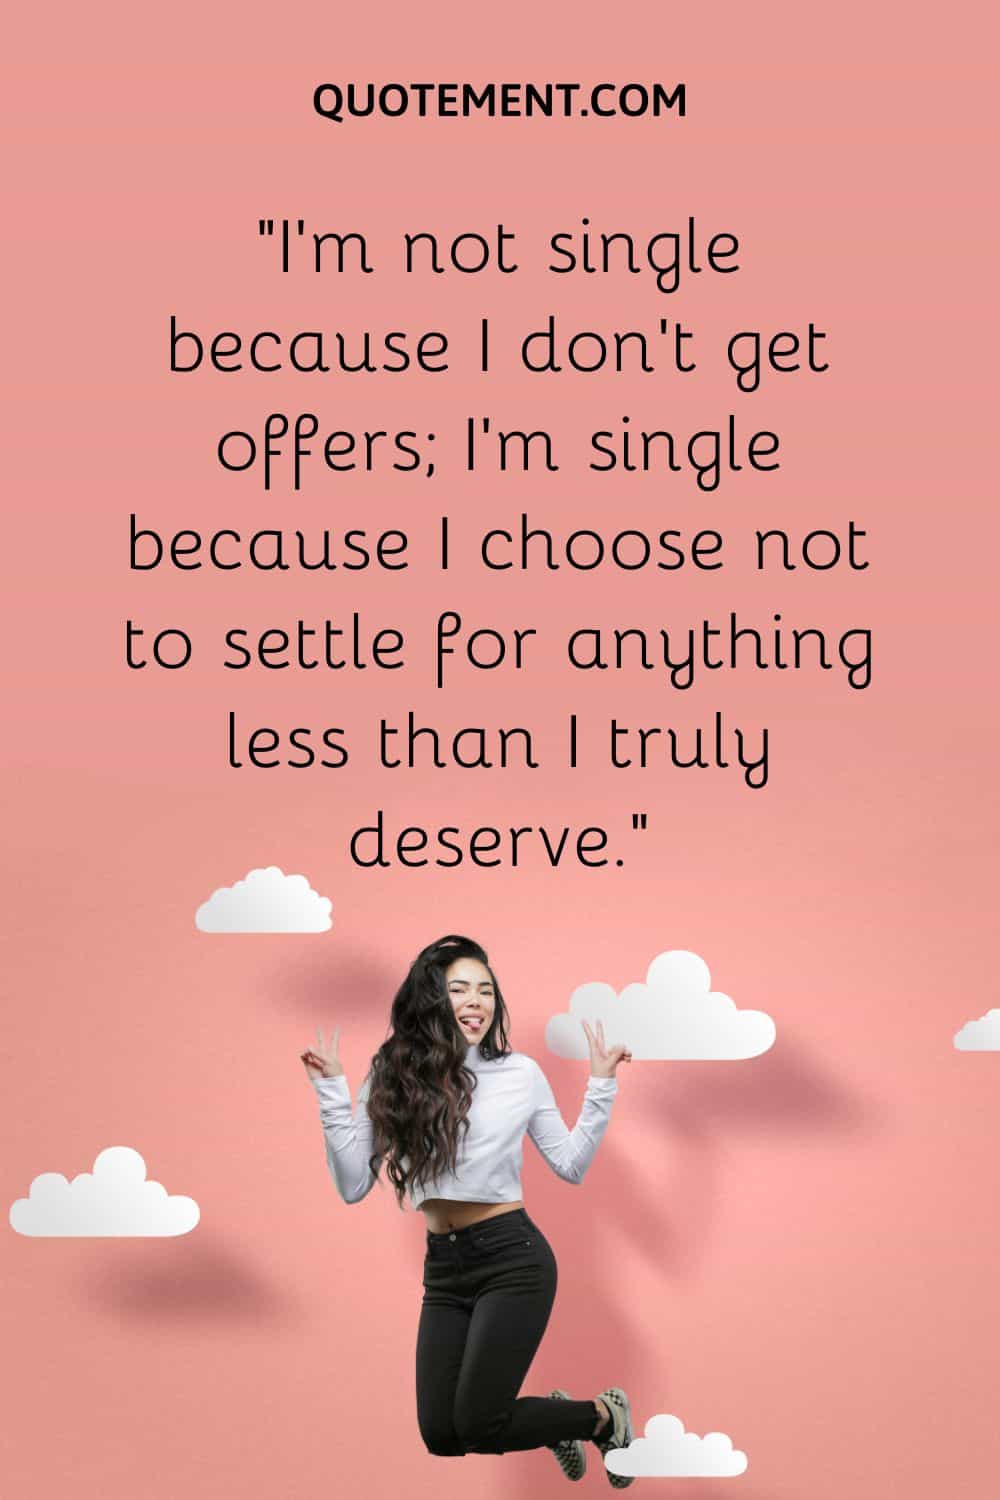 I’m not single because I don’t get offers